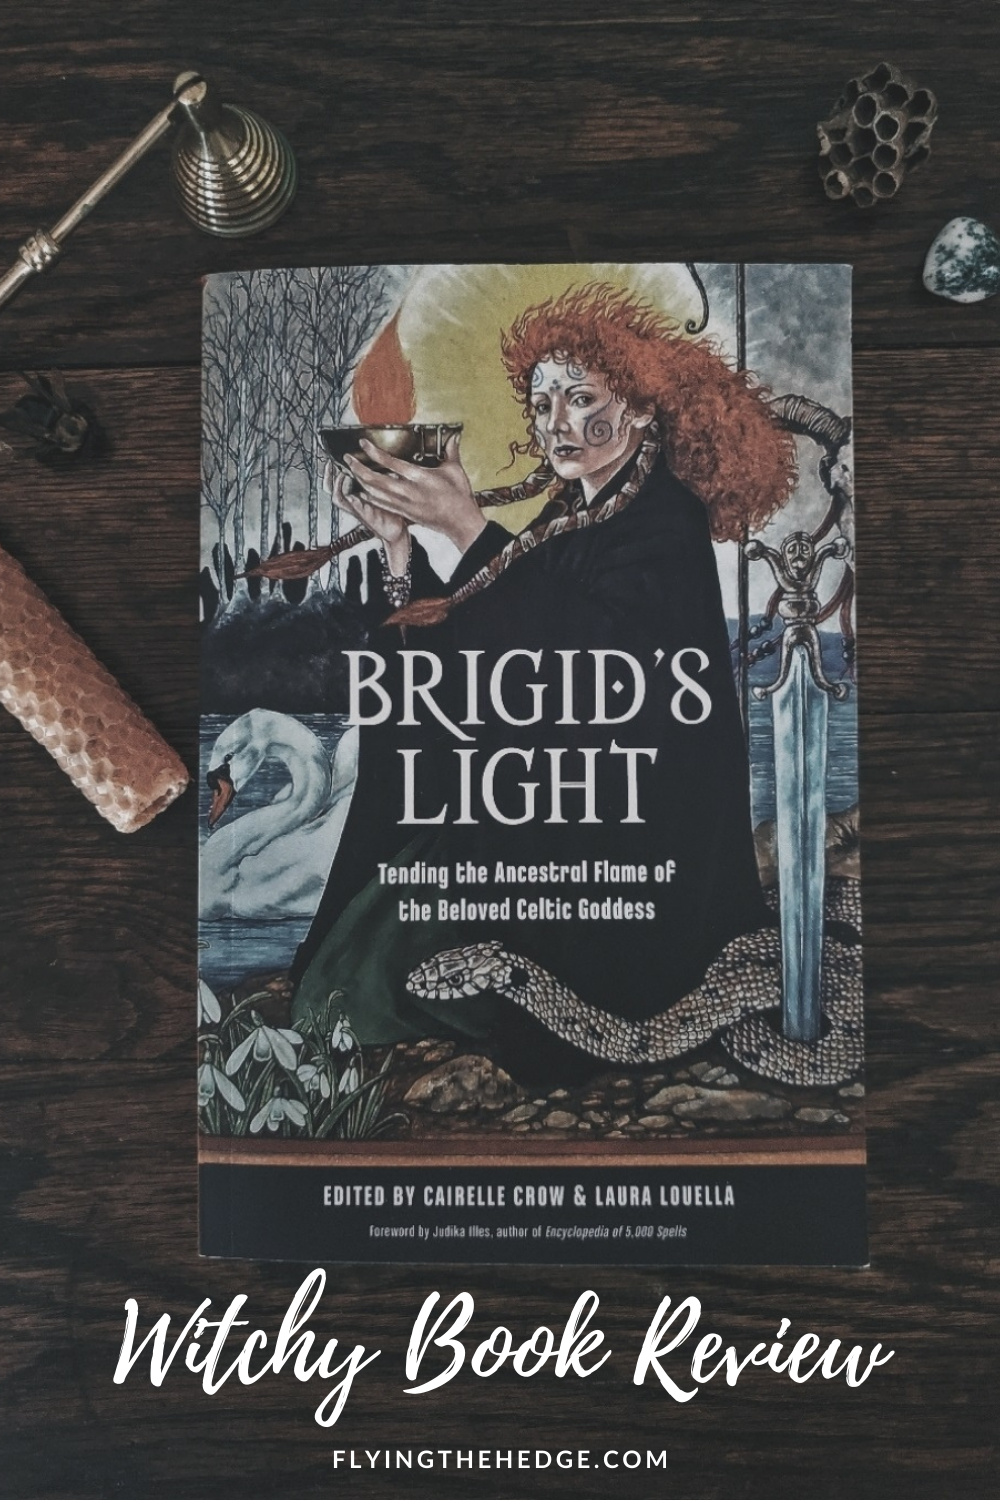 Brigid, St Brigid, goddess, folklore, folk magic, book review, witch, witchcraft, wicca, wiccan, pagan, neopagan, witchy reads, witch book